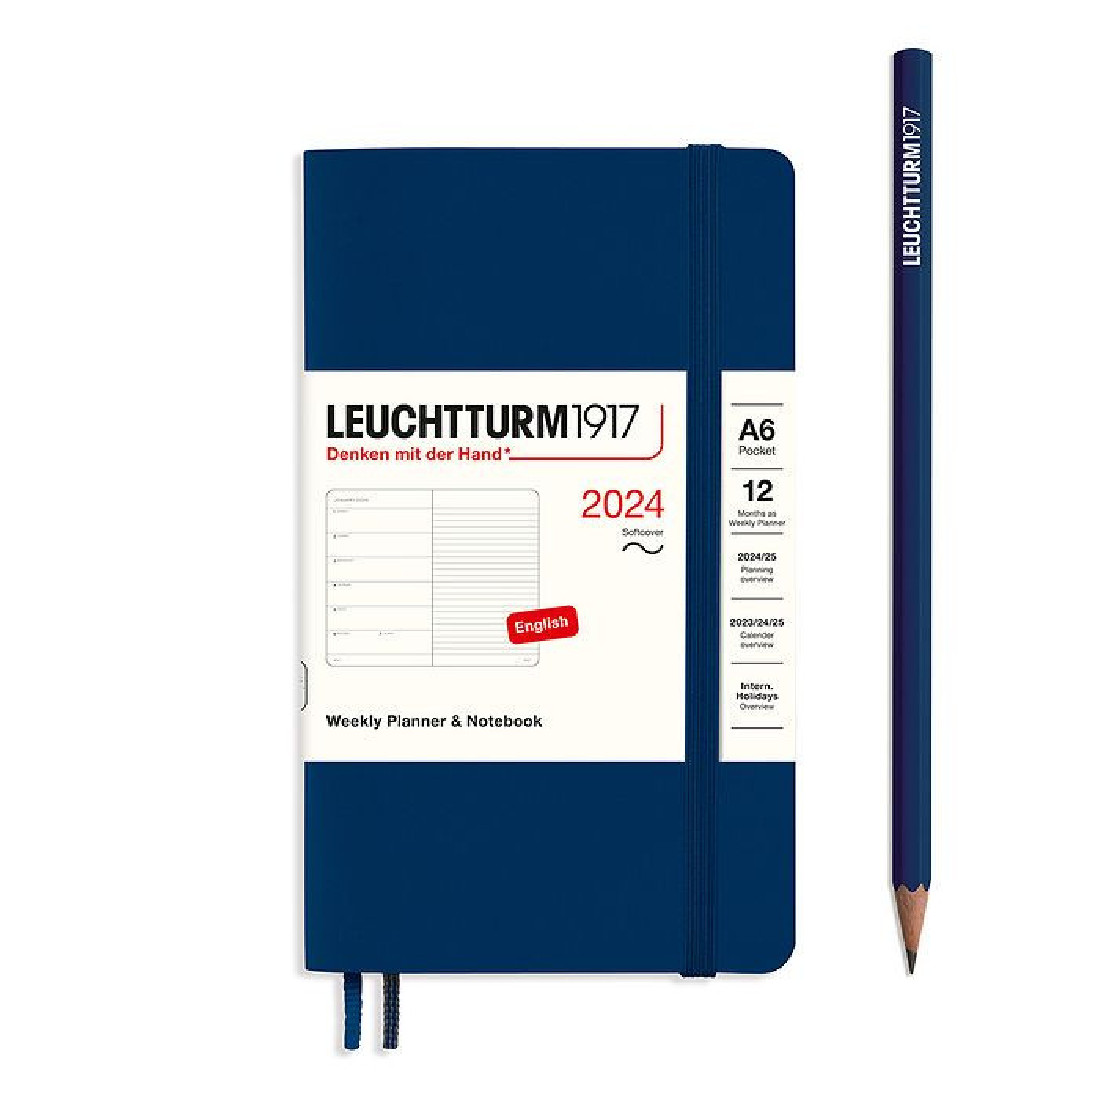 Leuchtturm 1917 Weekly Planner and Notebook 2024 Navy Pocket A6 Soft Cover